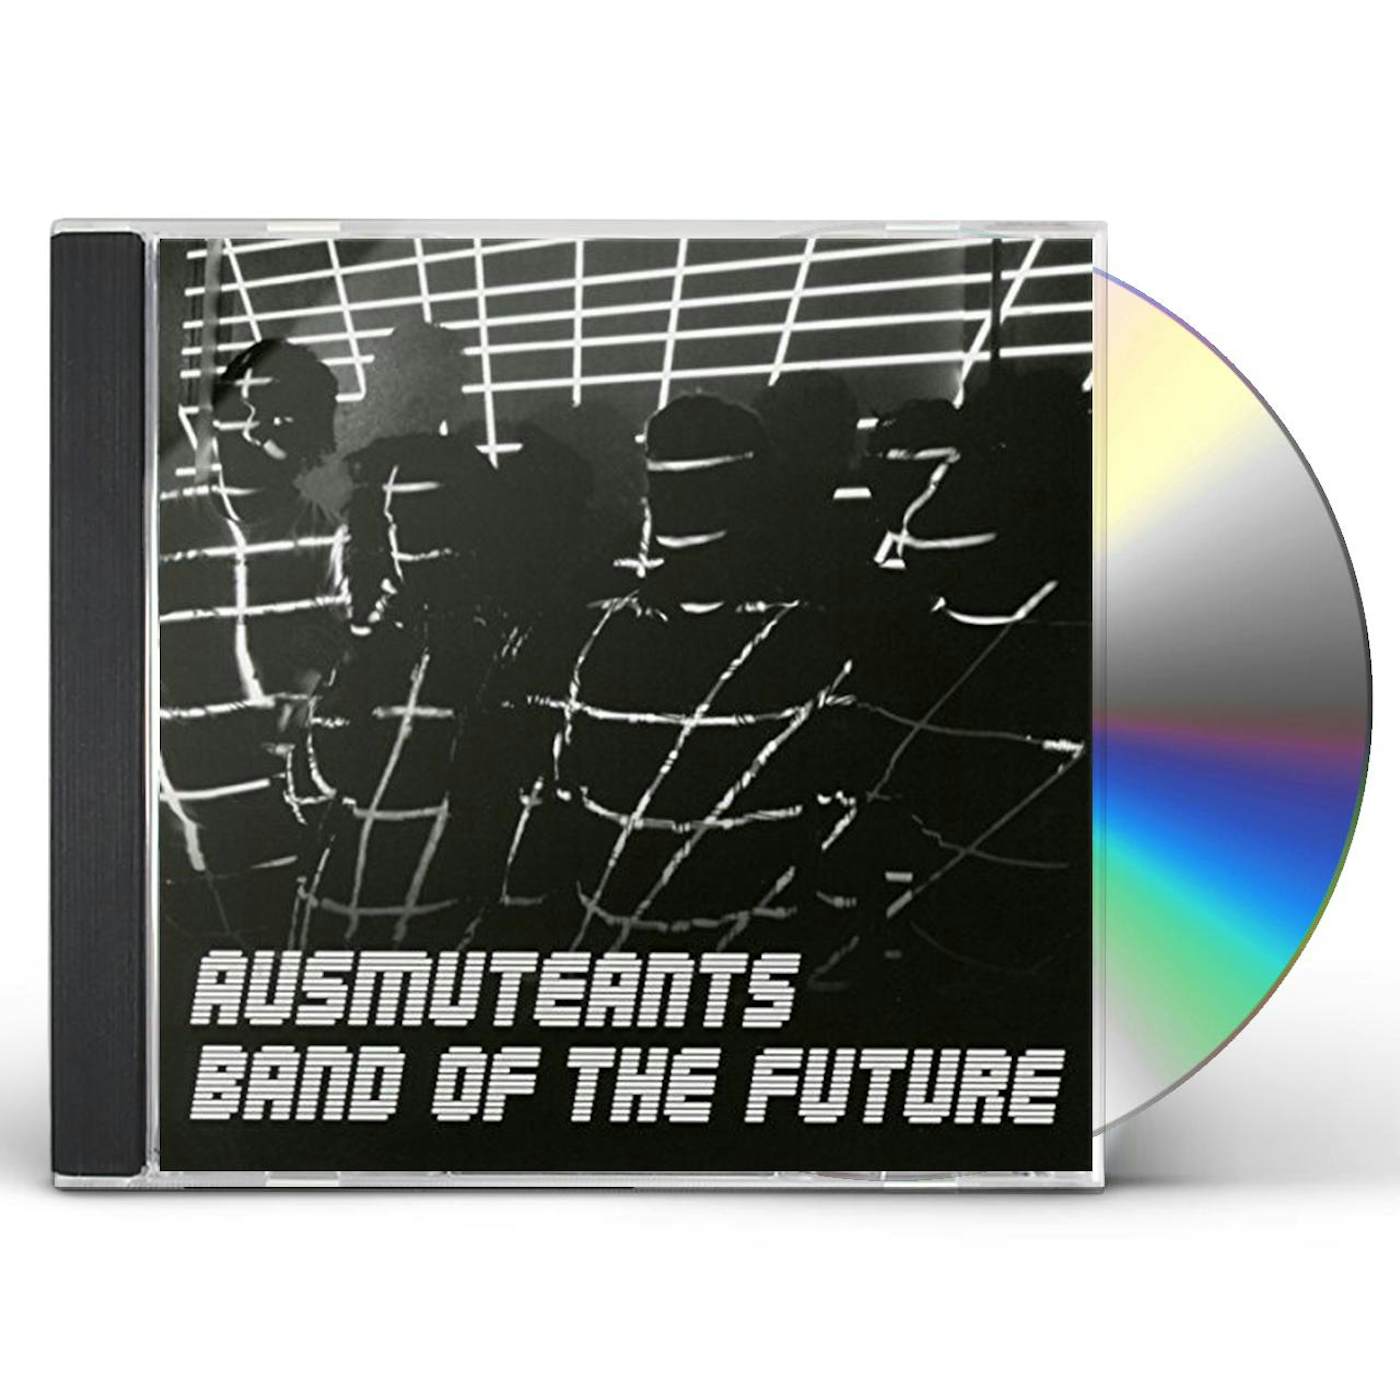 Ausmuteants BAND OF THE FUTURE CD